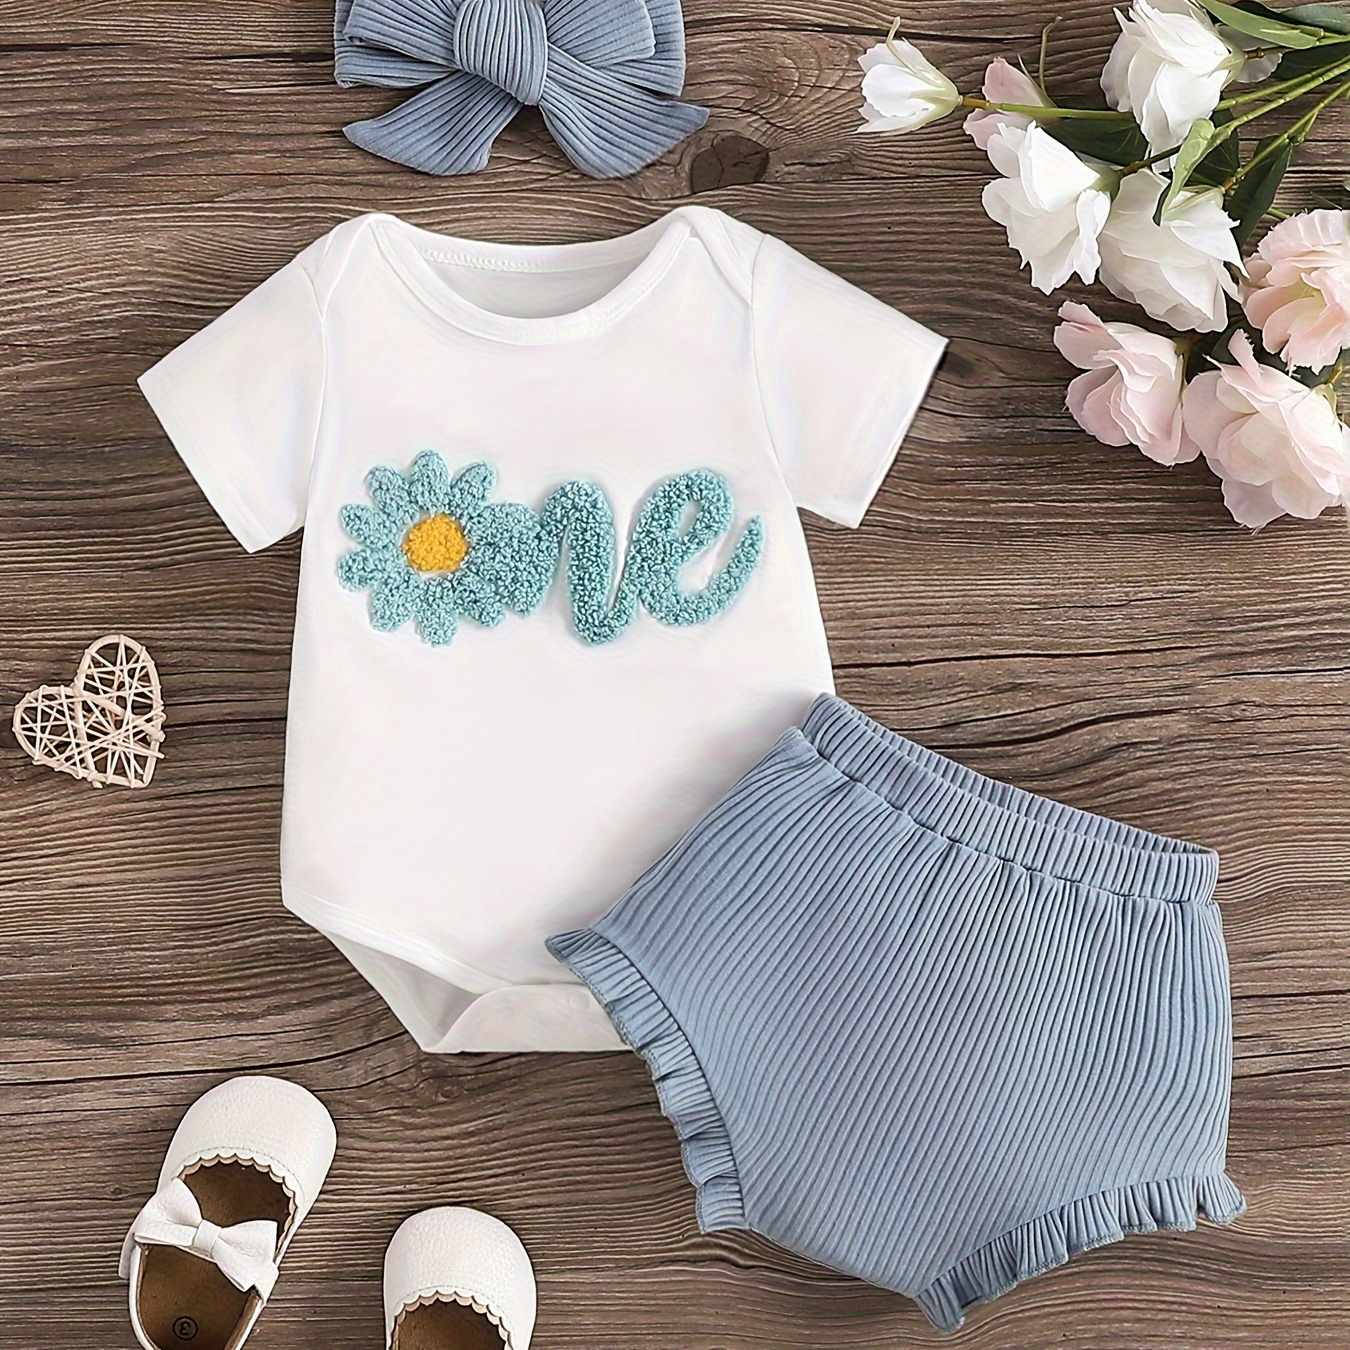 

Baby's 1 Flower Embroidered 2pcs Summer Outfit, Cotton Triangle Bodysuit & Ribbed Shorts Set, Toddler & Infant Girl's Clothes For Daily/holiday/party